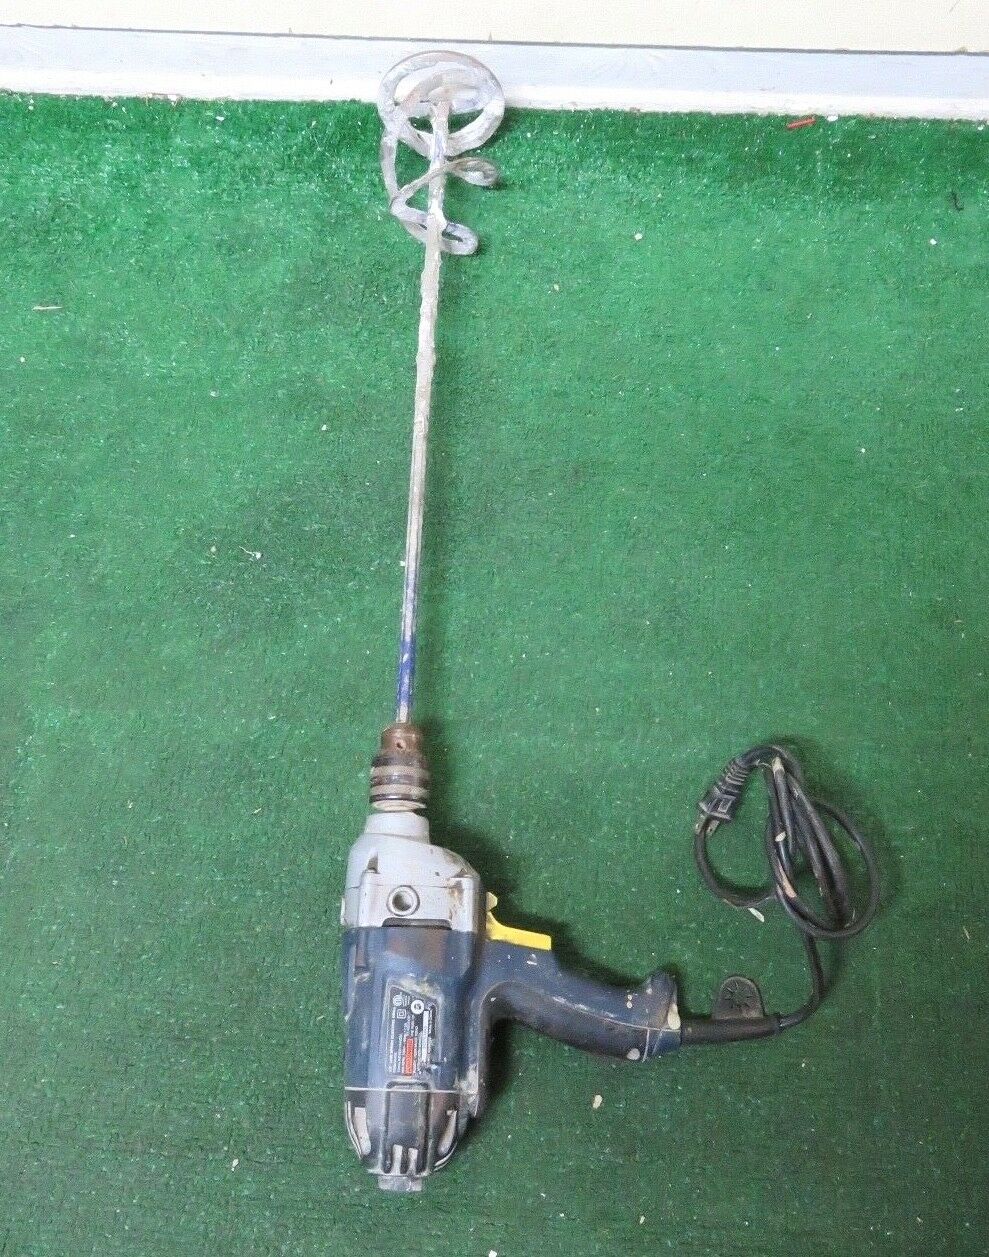 Chicago electric 60436.1/2 Inch Reversible Drill. Paint and mortar mixer